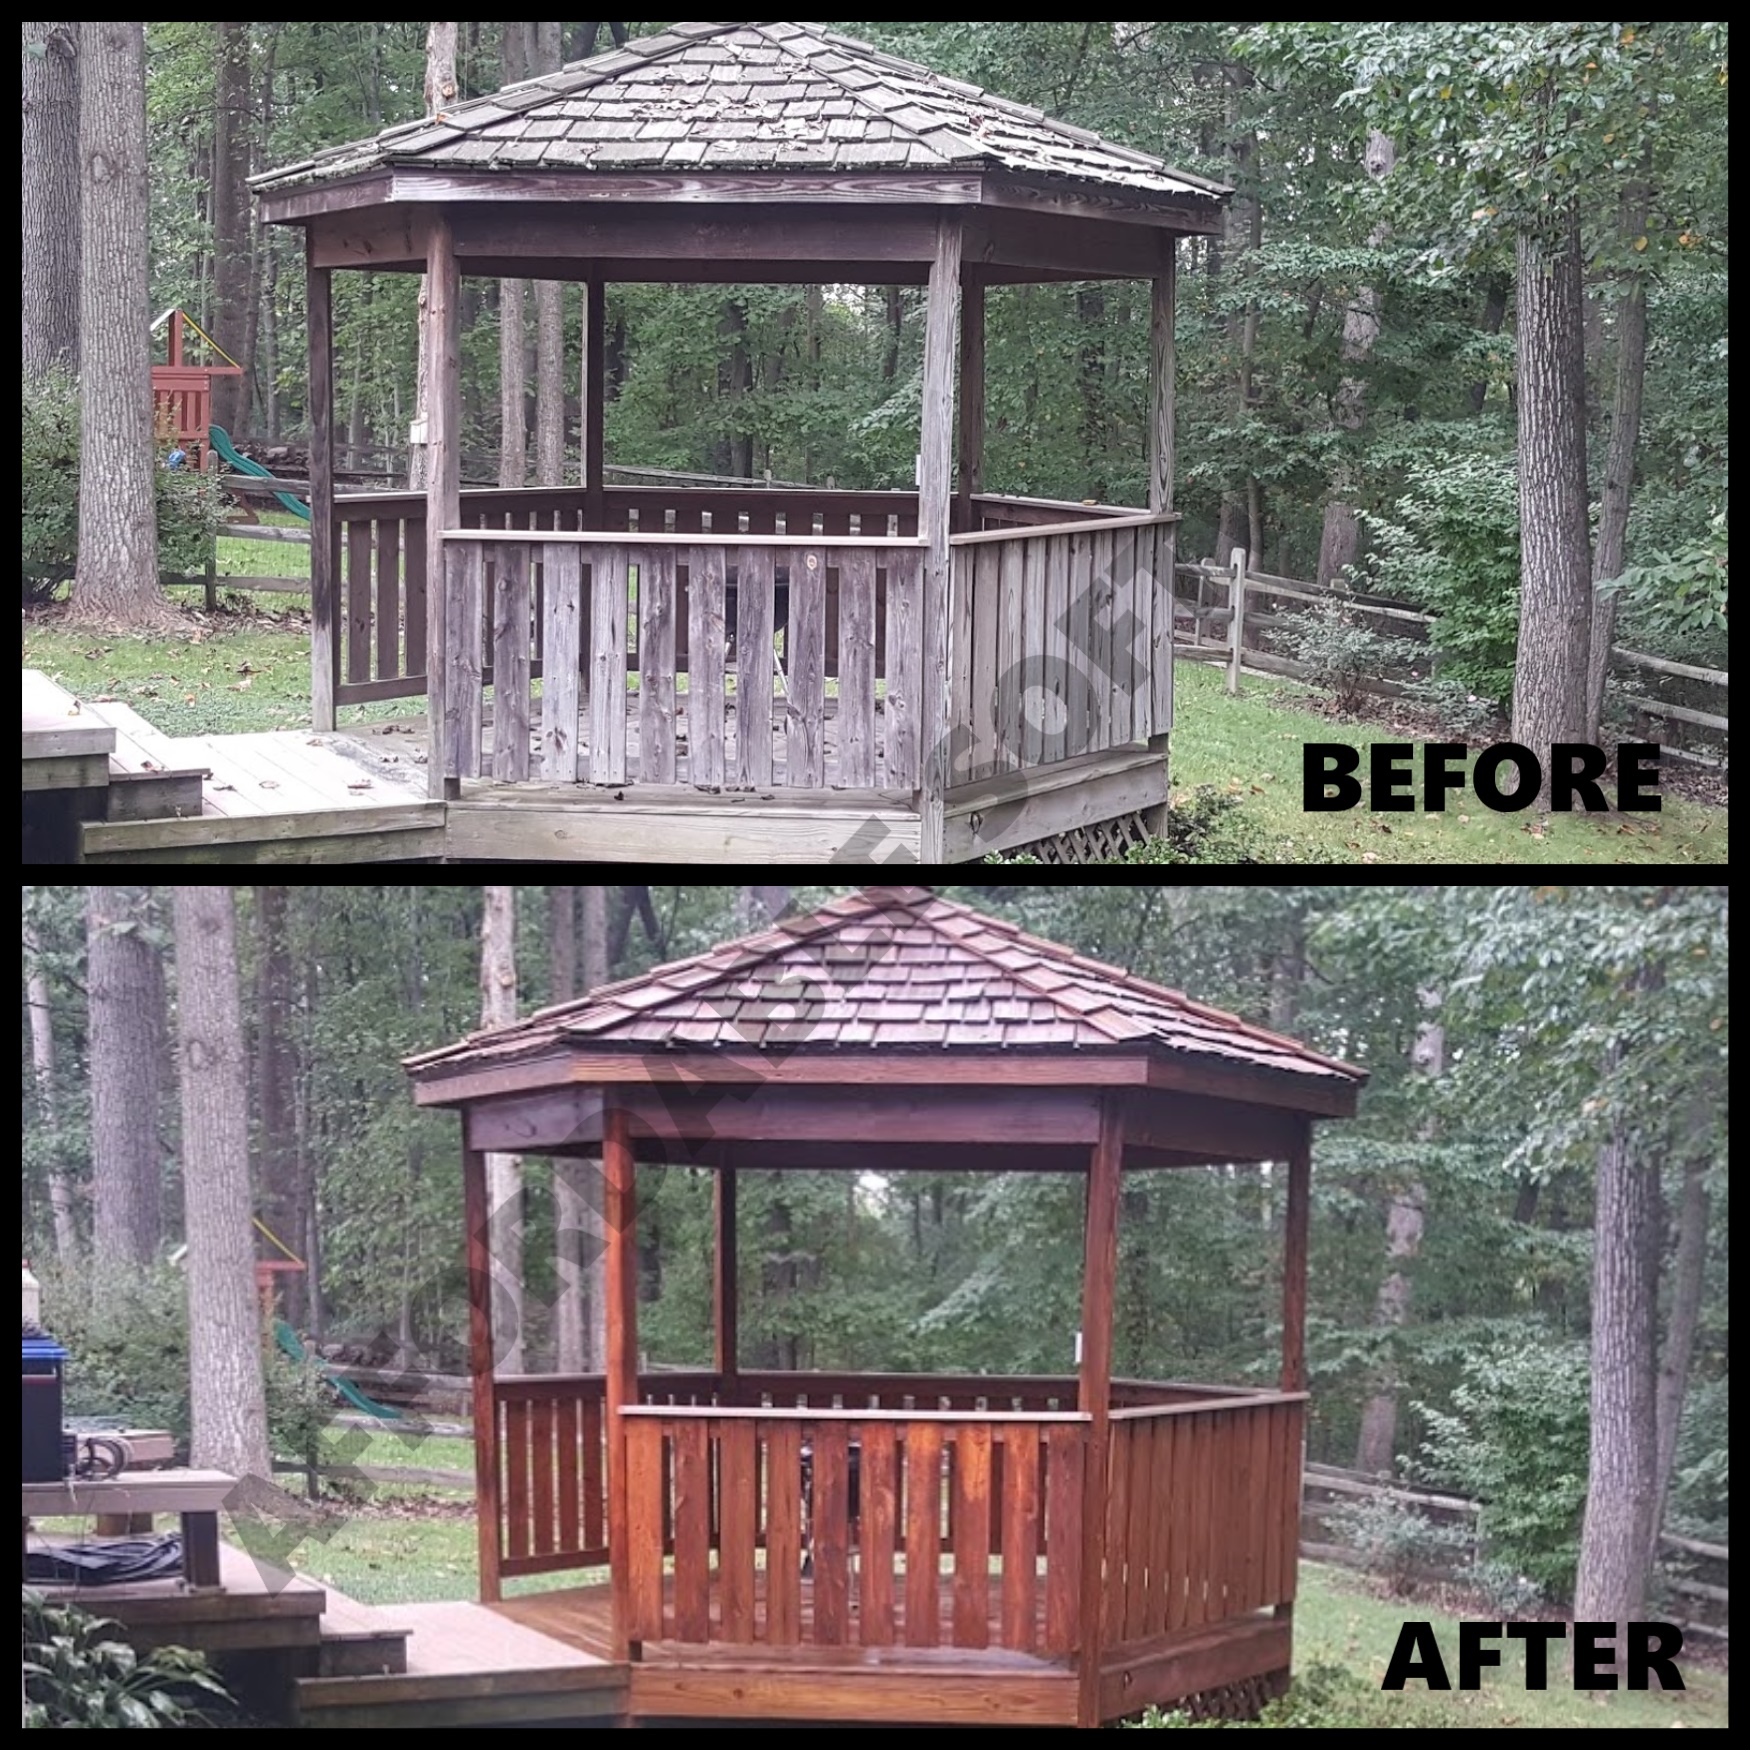 GAZEBO BEFORE AND AFTER.jpg